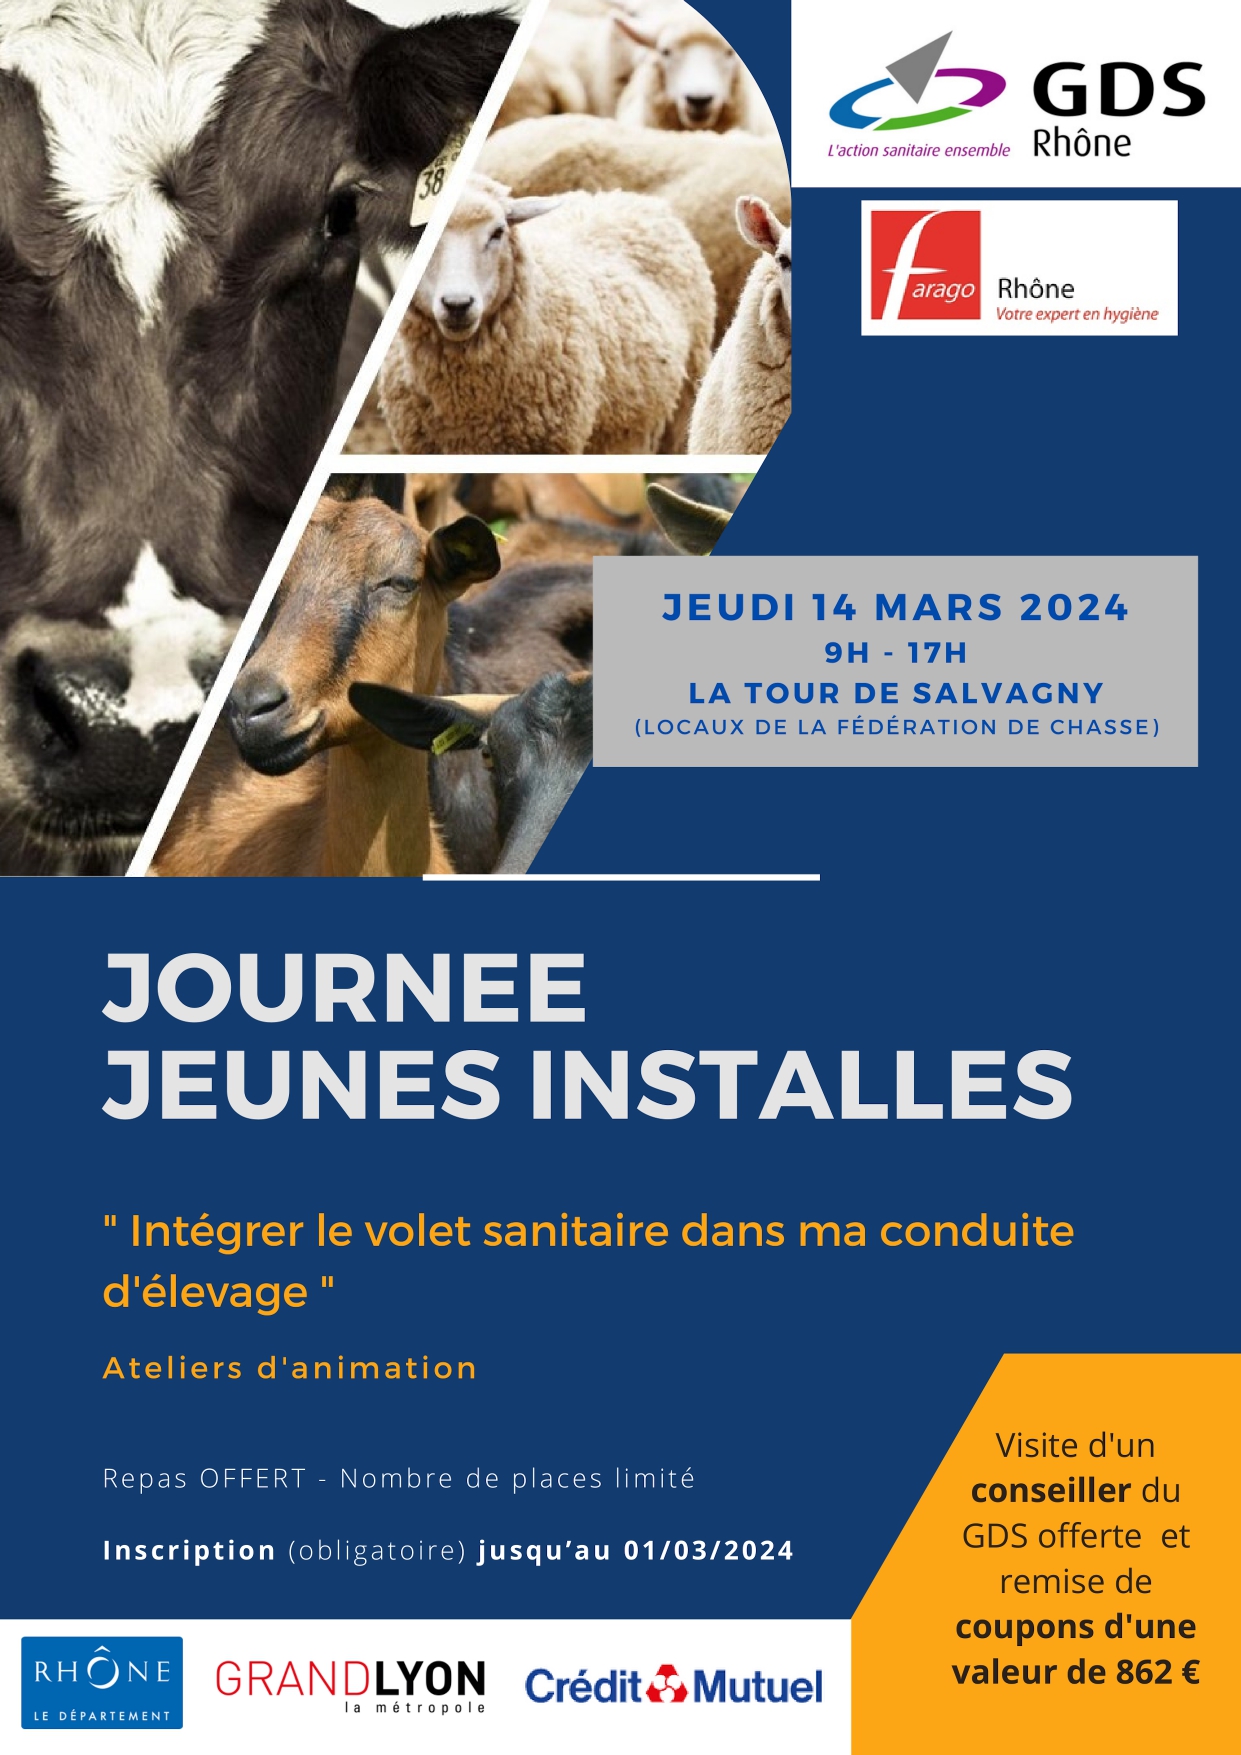 Mailing_Journee jeunes installes 2024_pages-to-jpg-0001